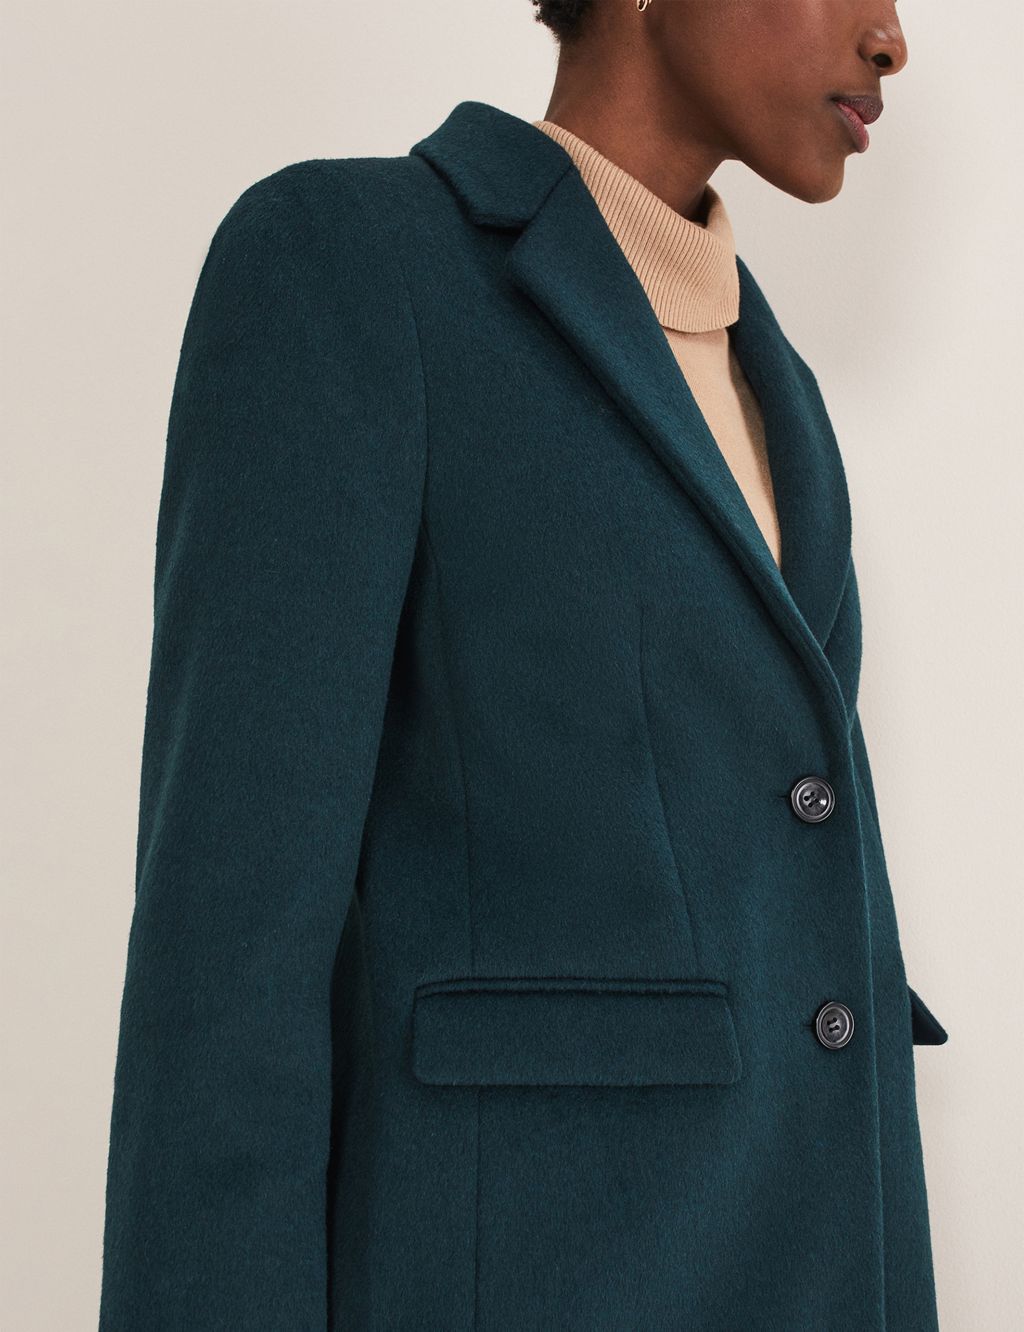 Wool Blend Collared Tailored Coat | Phase Eight | M&S